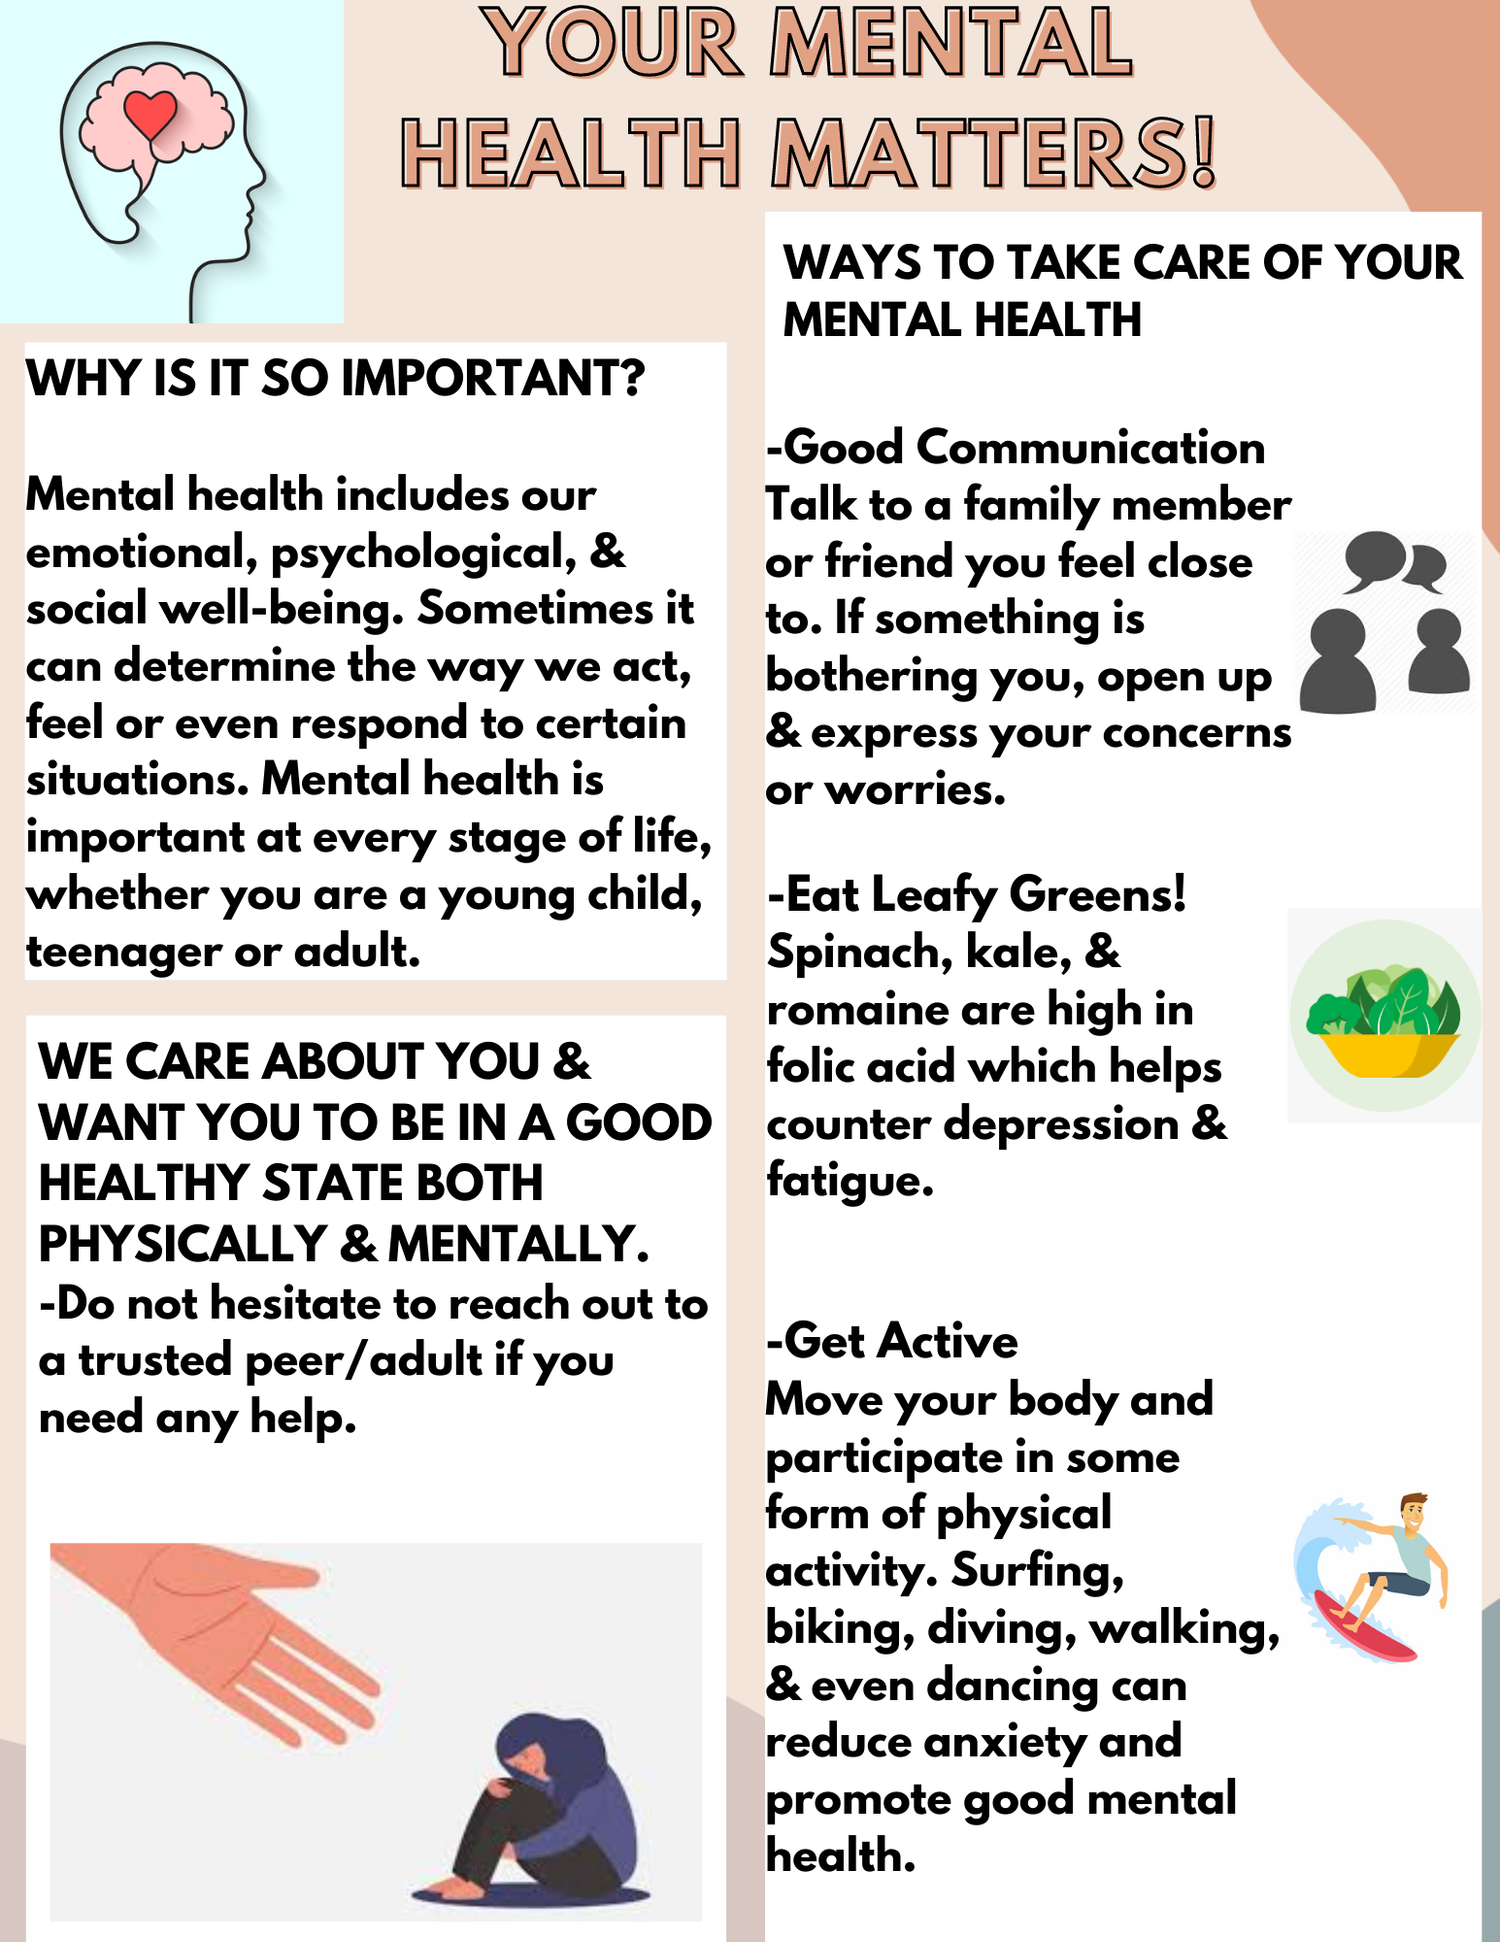 Why Mental Health Matters?